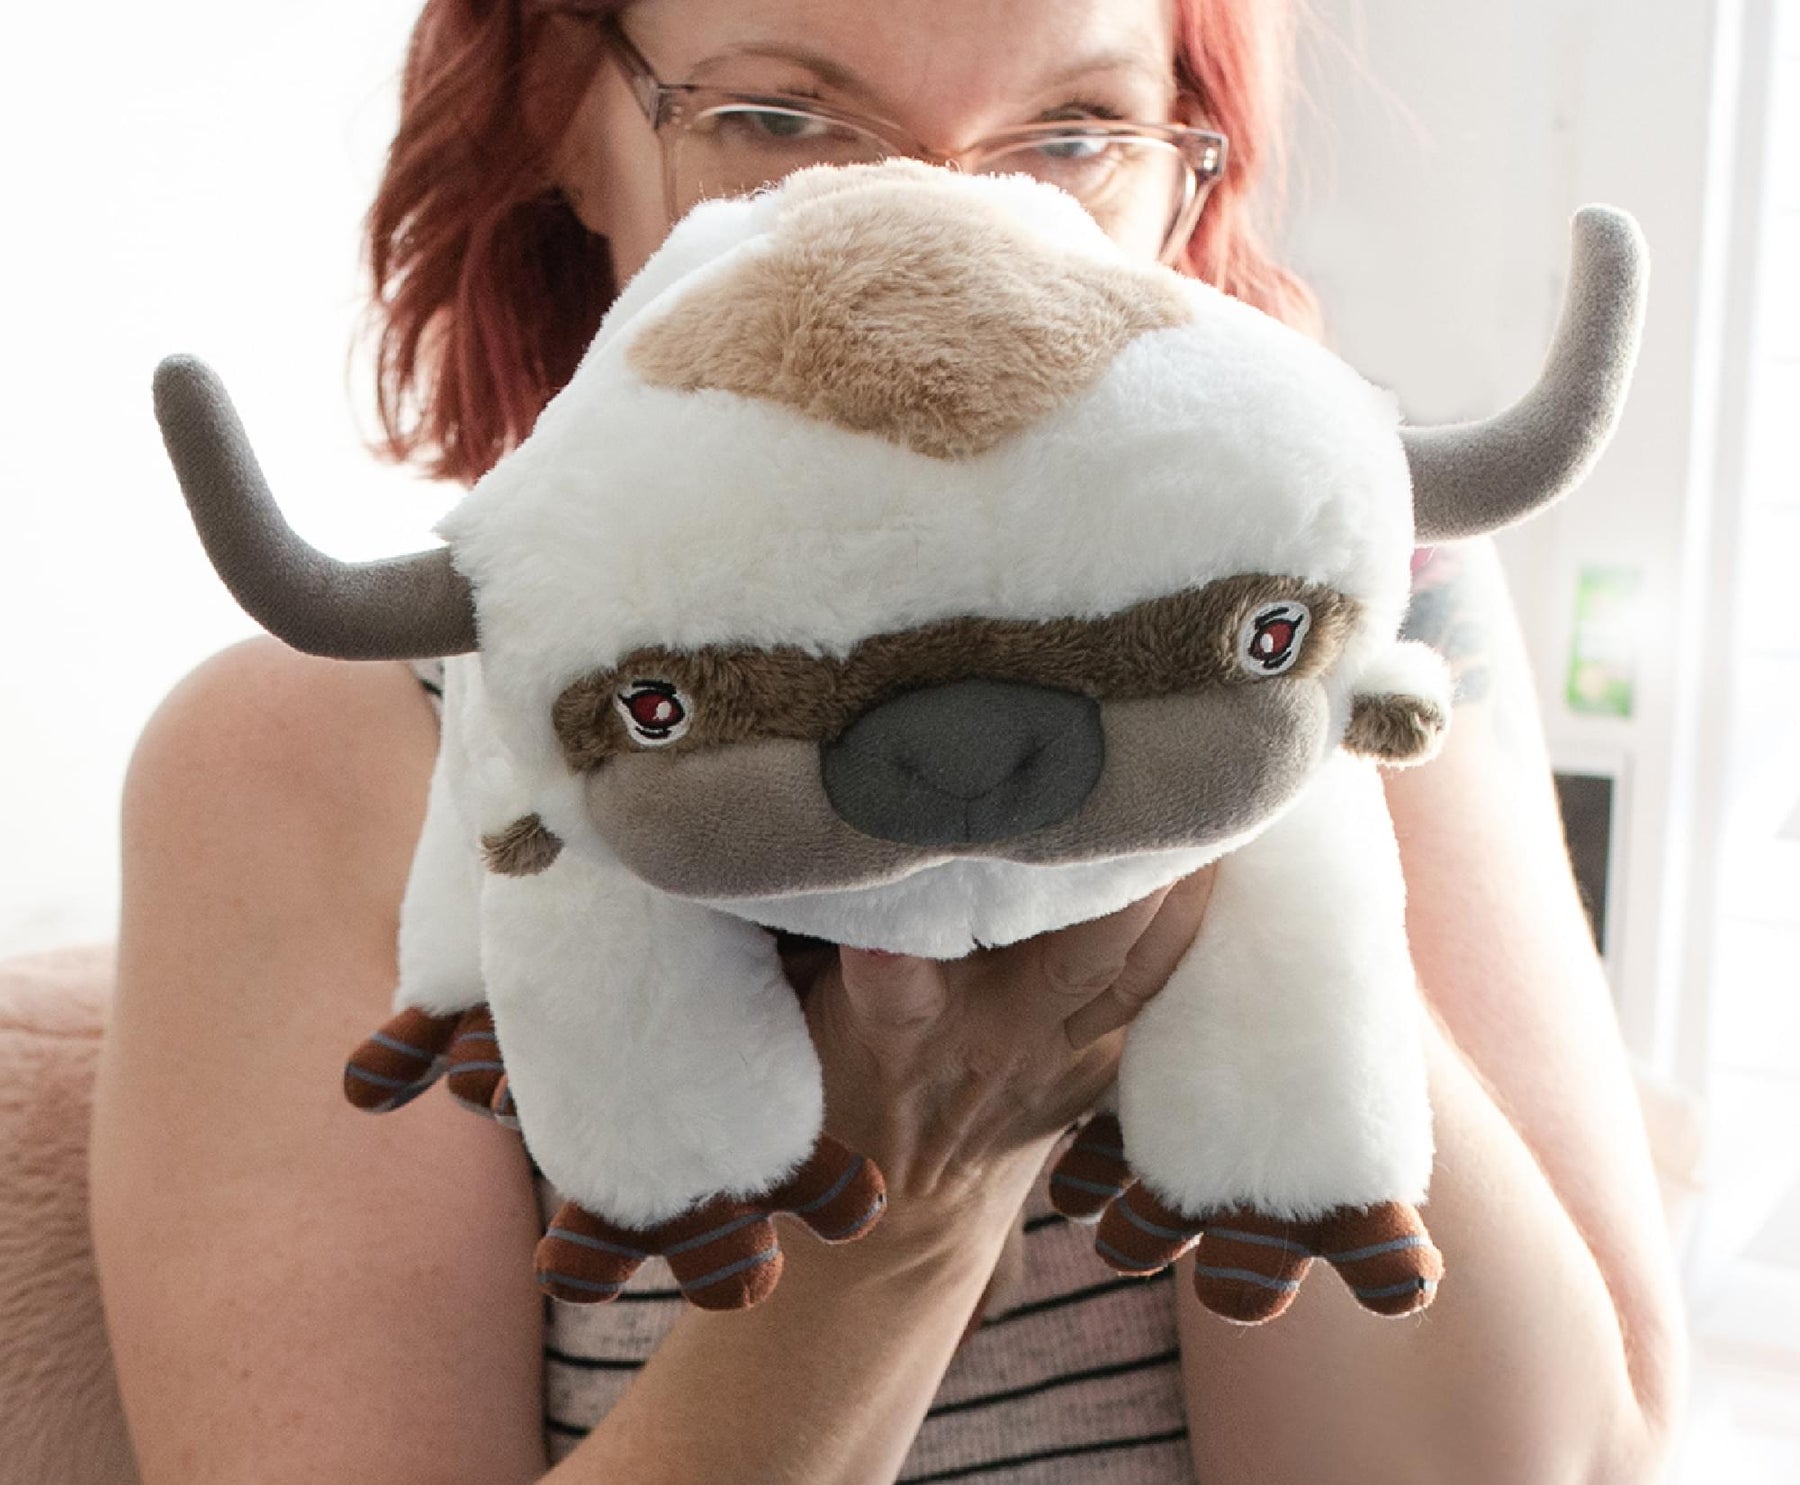 Avatar: The Last Airbender 15-Inch Character Plush Toy | Appa